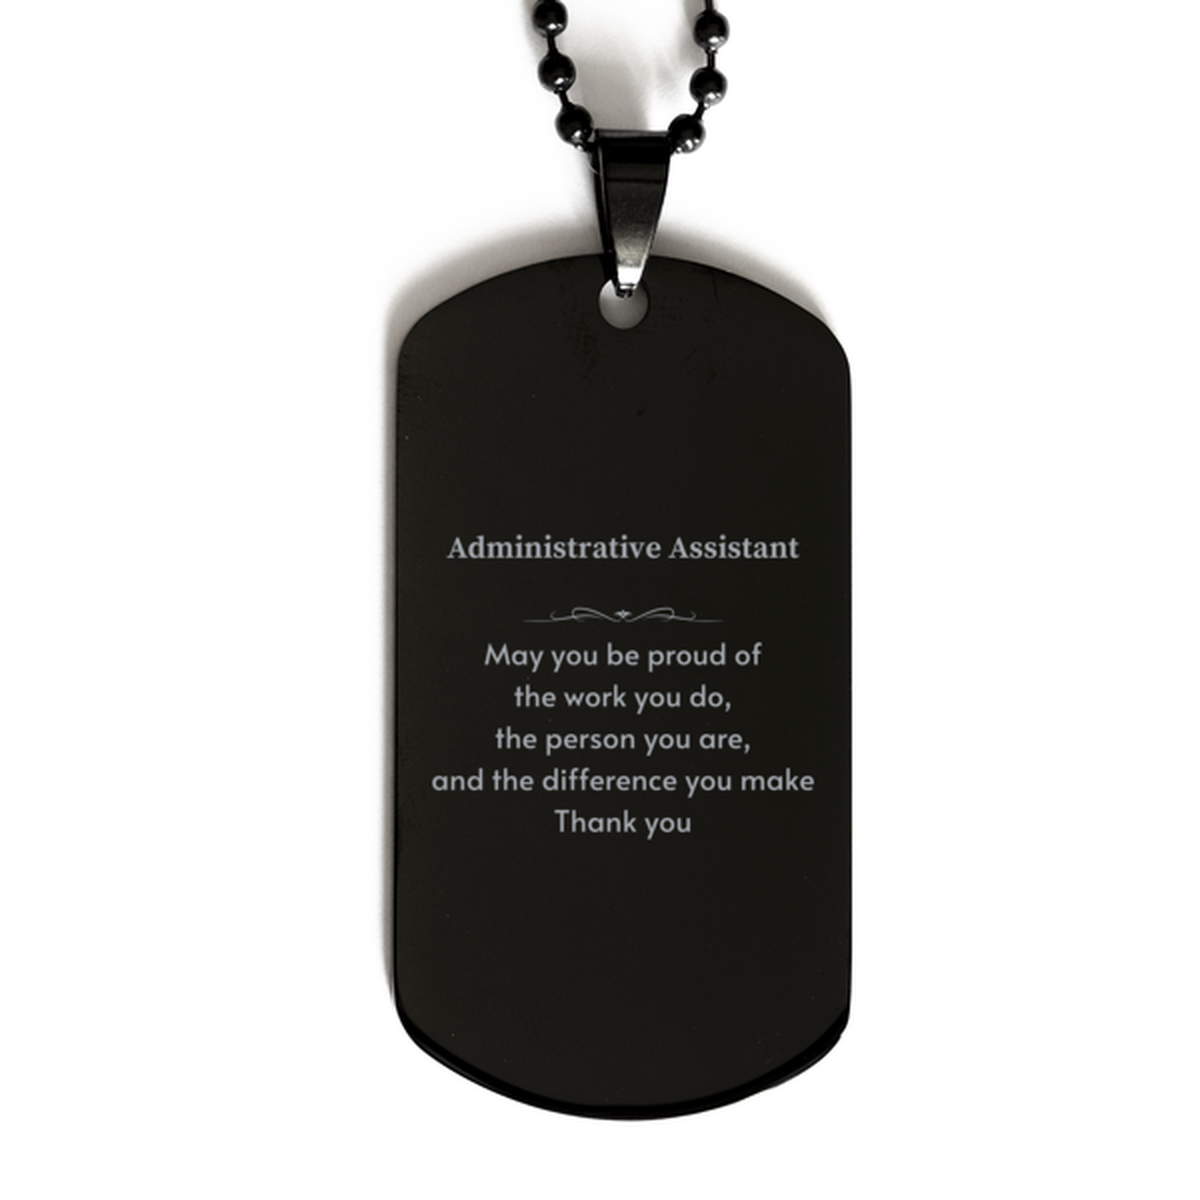 Heartwarming Black Dog Tag Retirement Coworkers Gifts for Administrative Assistant, Administrative Assistant May You be proud of the work you do, the person you are Gifts for Boss Men Women Friends